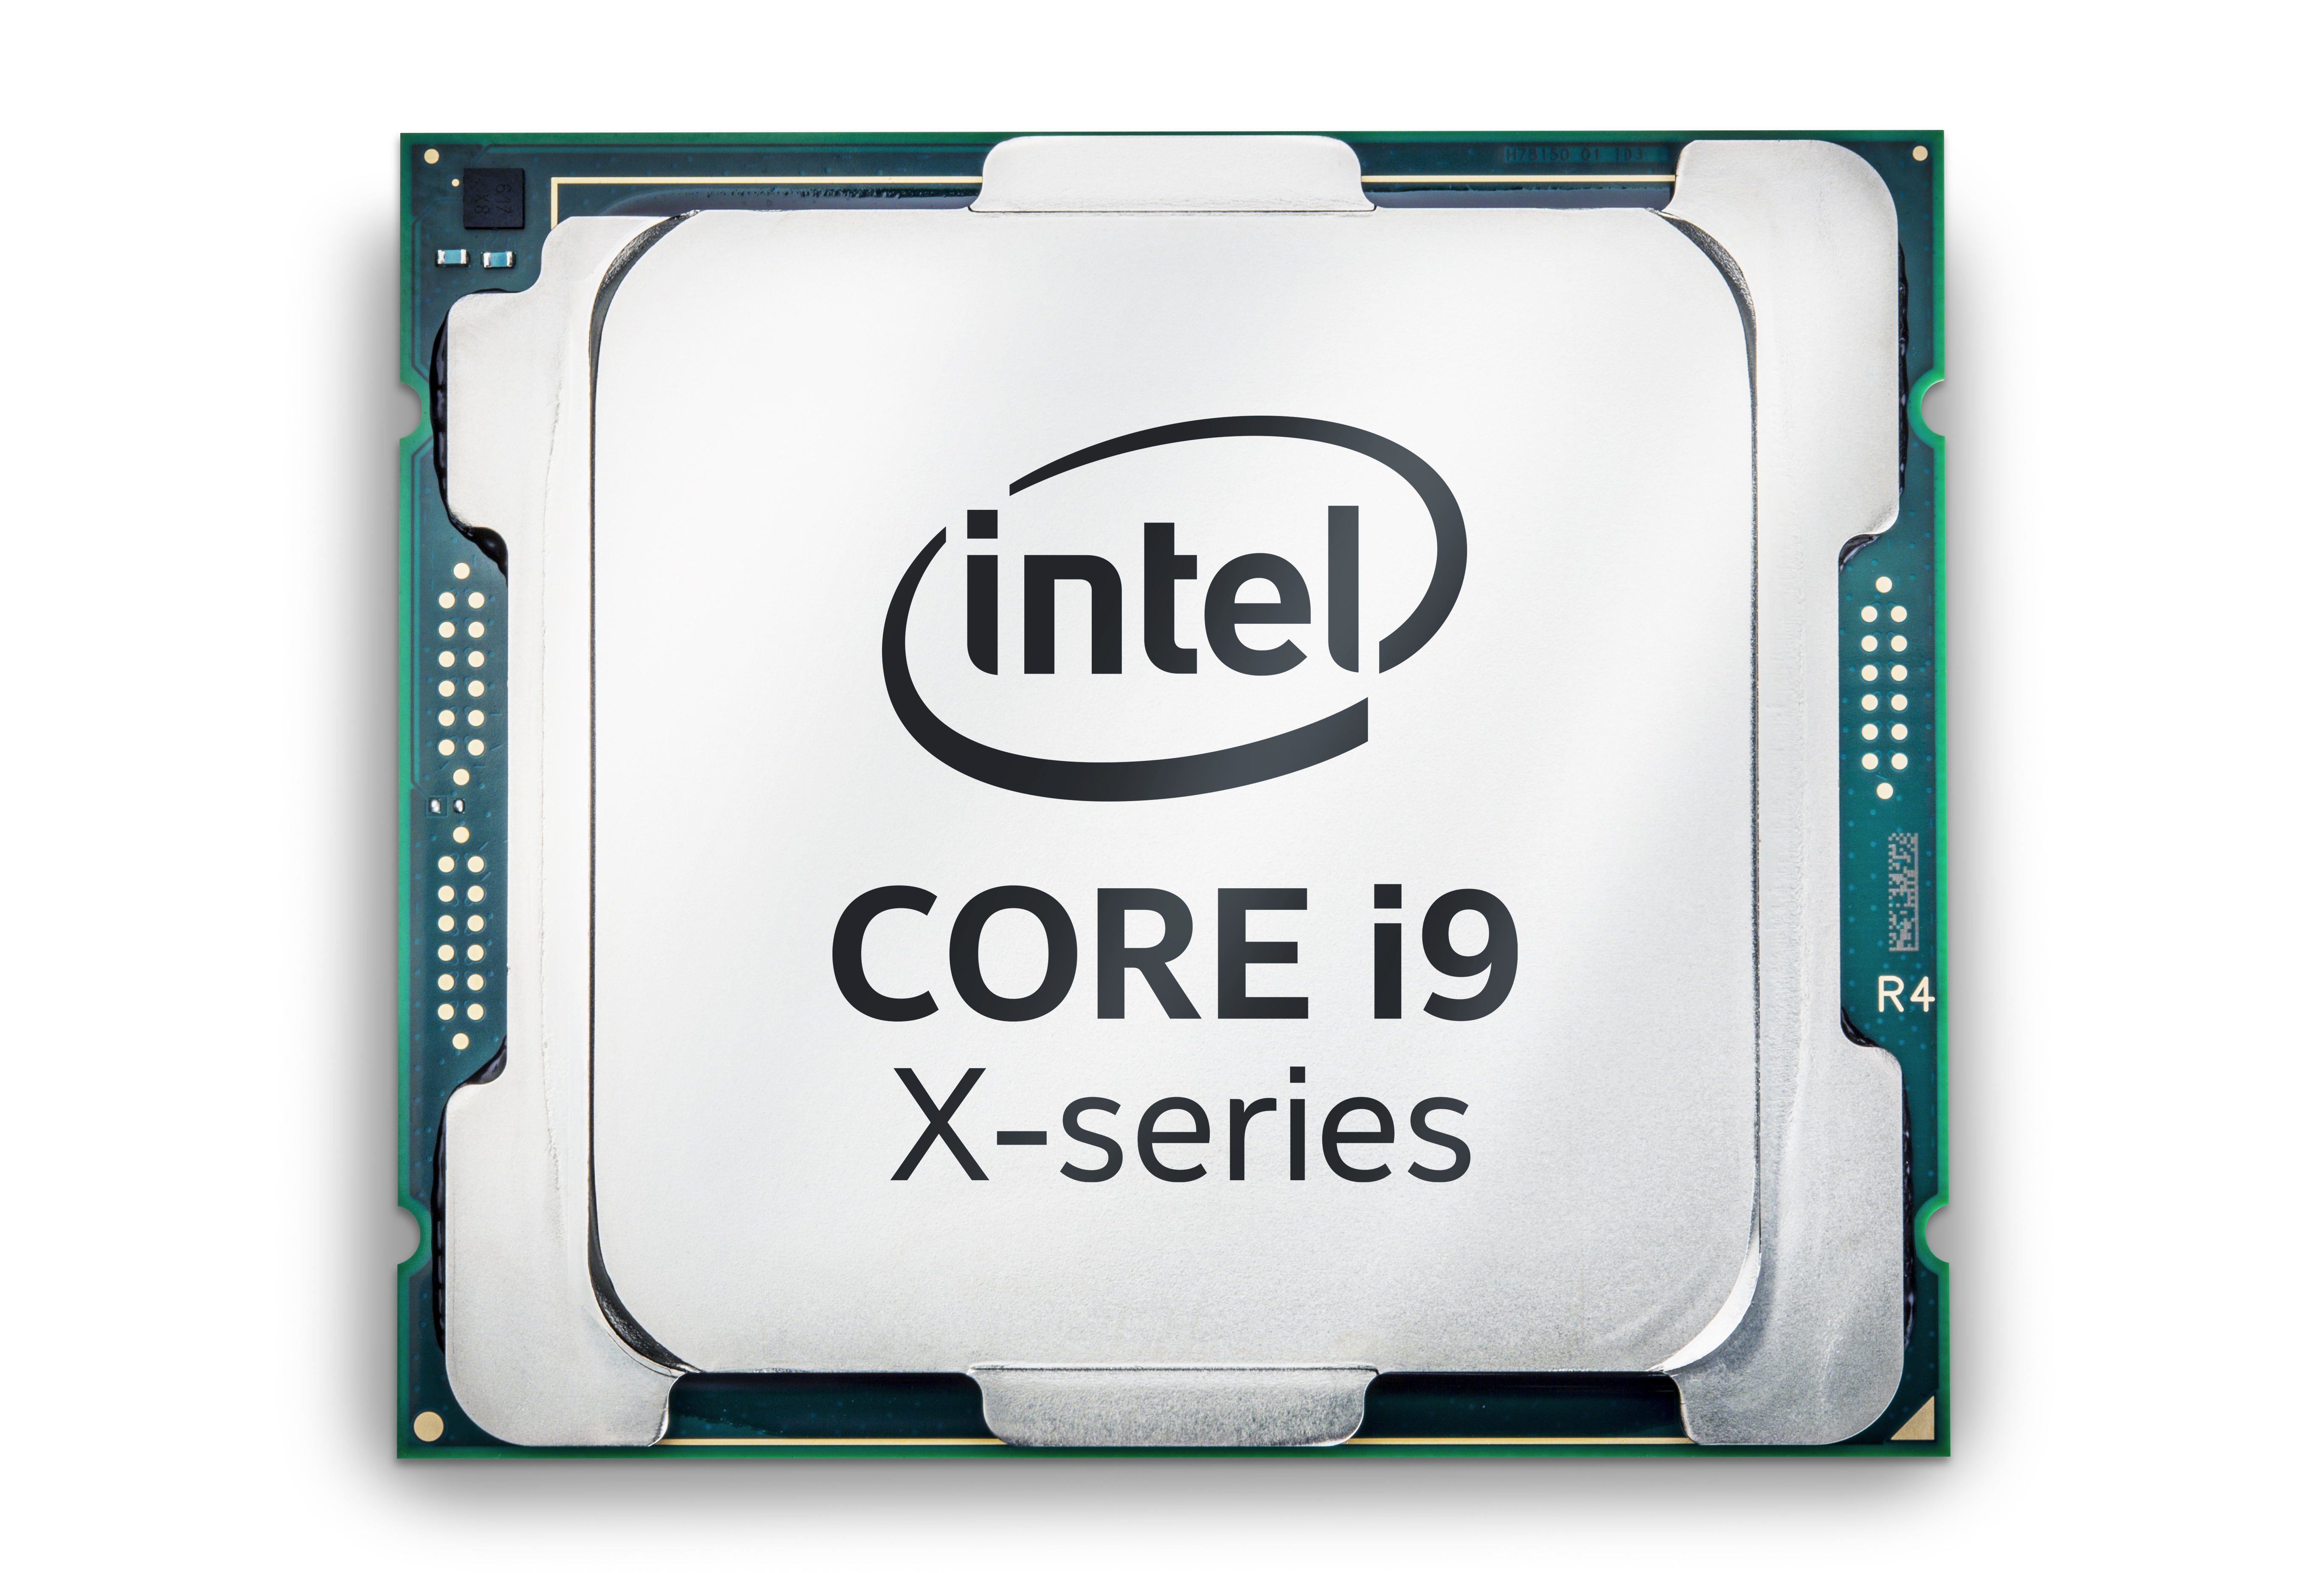 Intel unveils Xseries platform Up to 18 cores and 36 threads, from